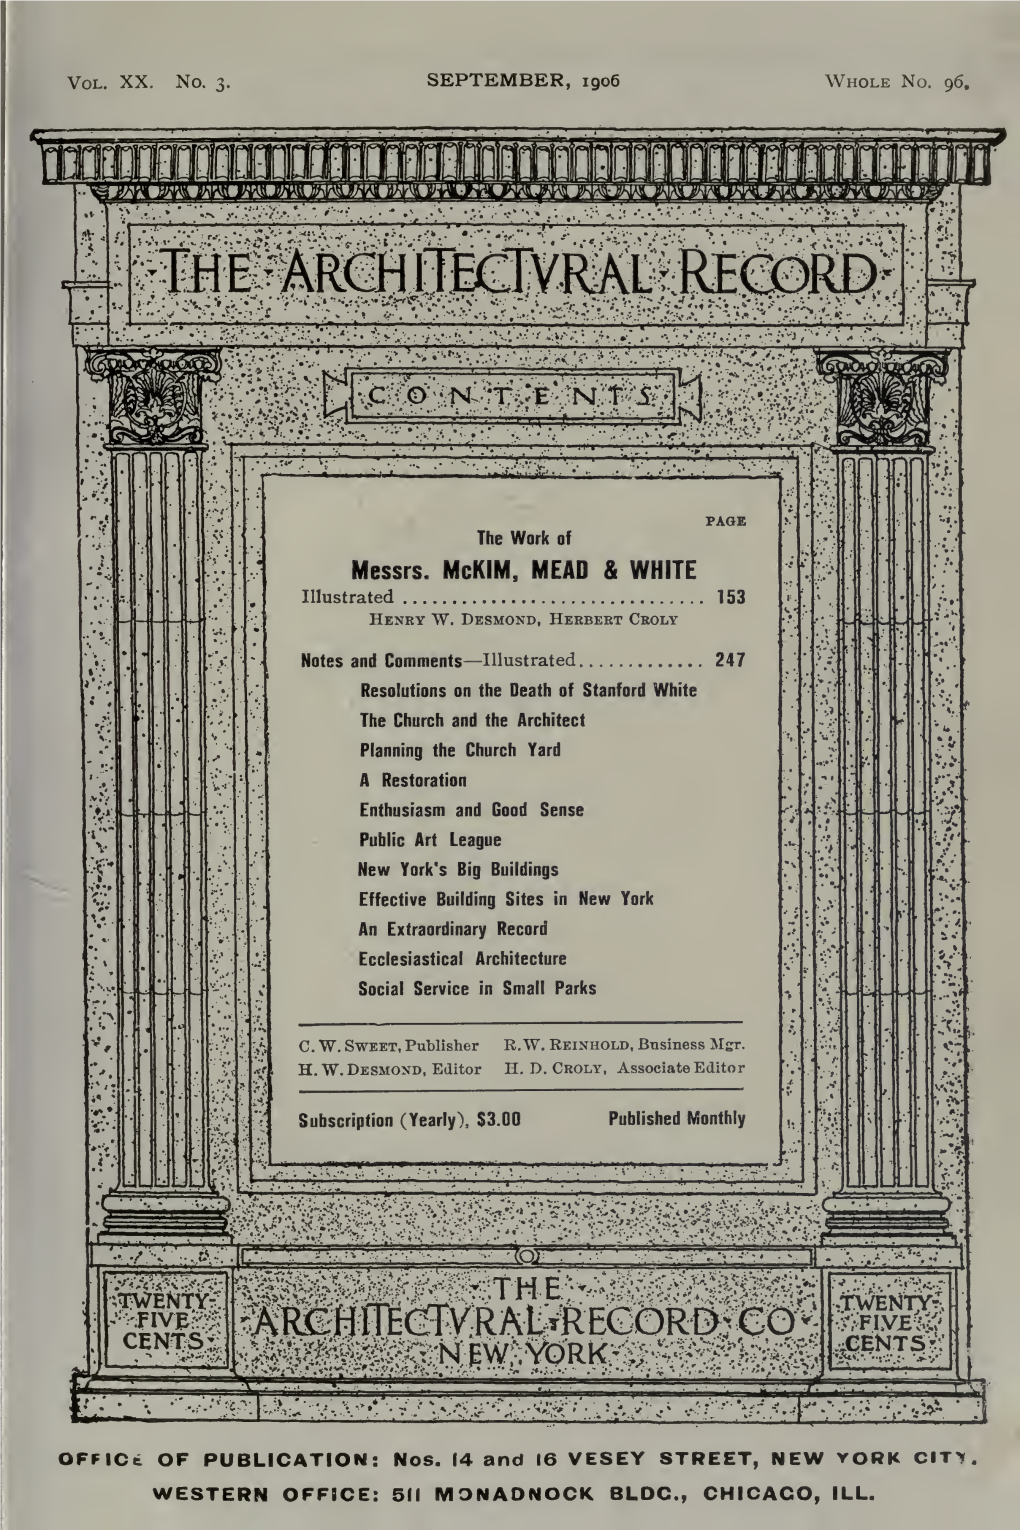 Architectural Record Was Devoted to Be Asserted of Any of the Embodiments the Work of Messrs